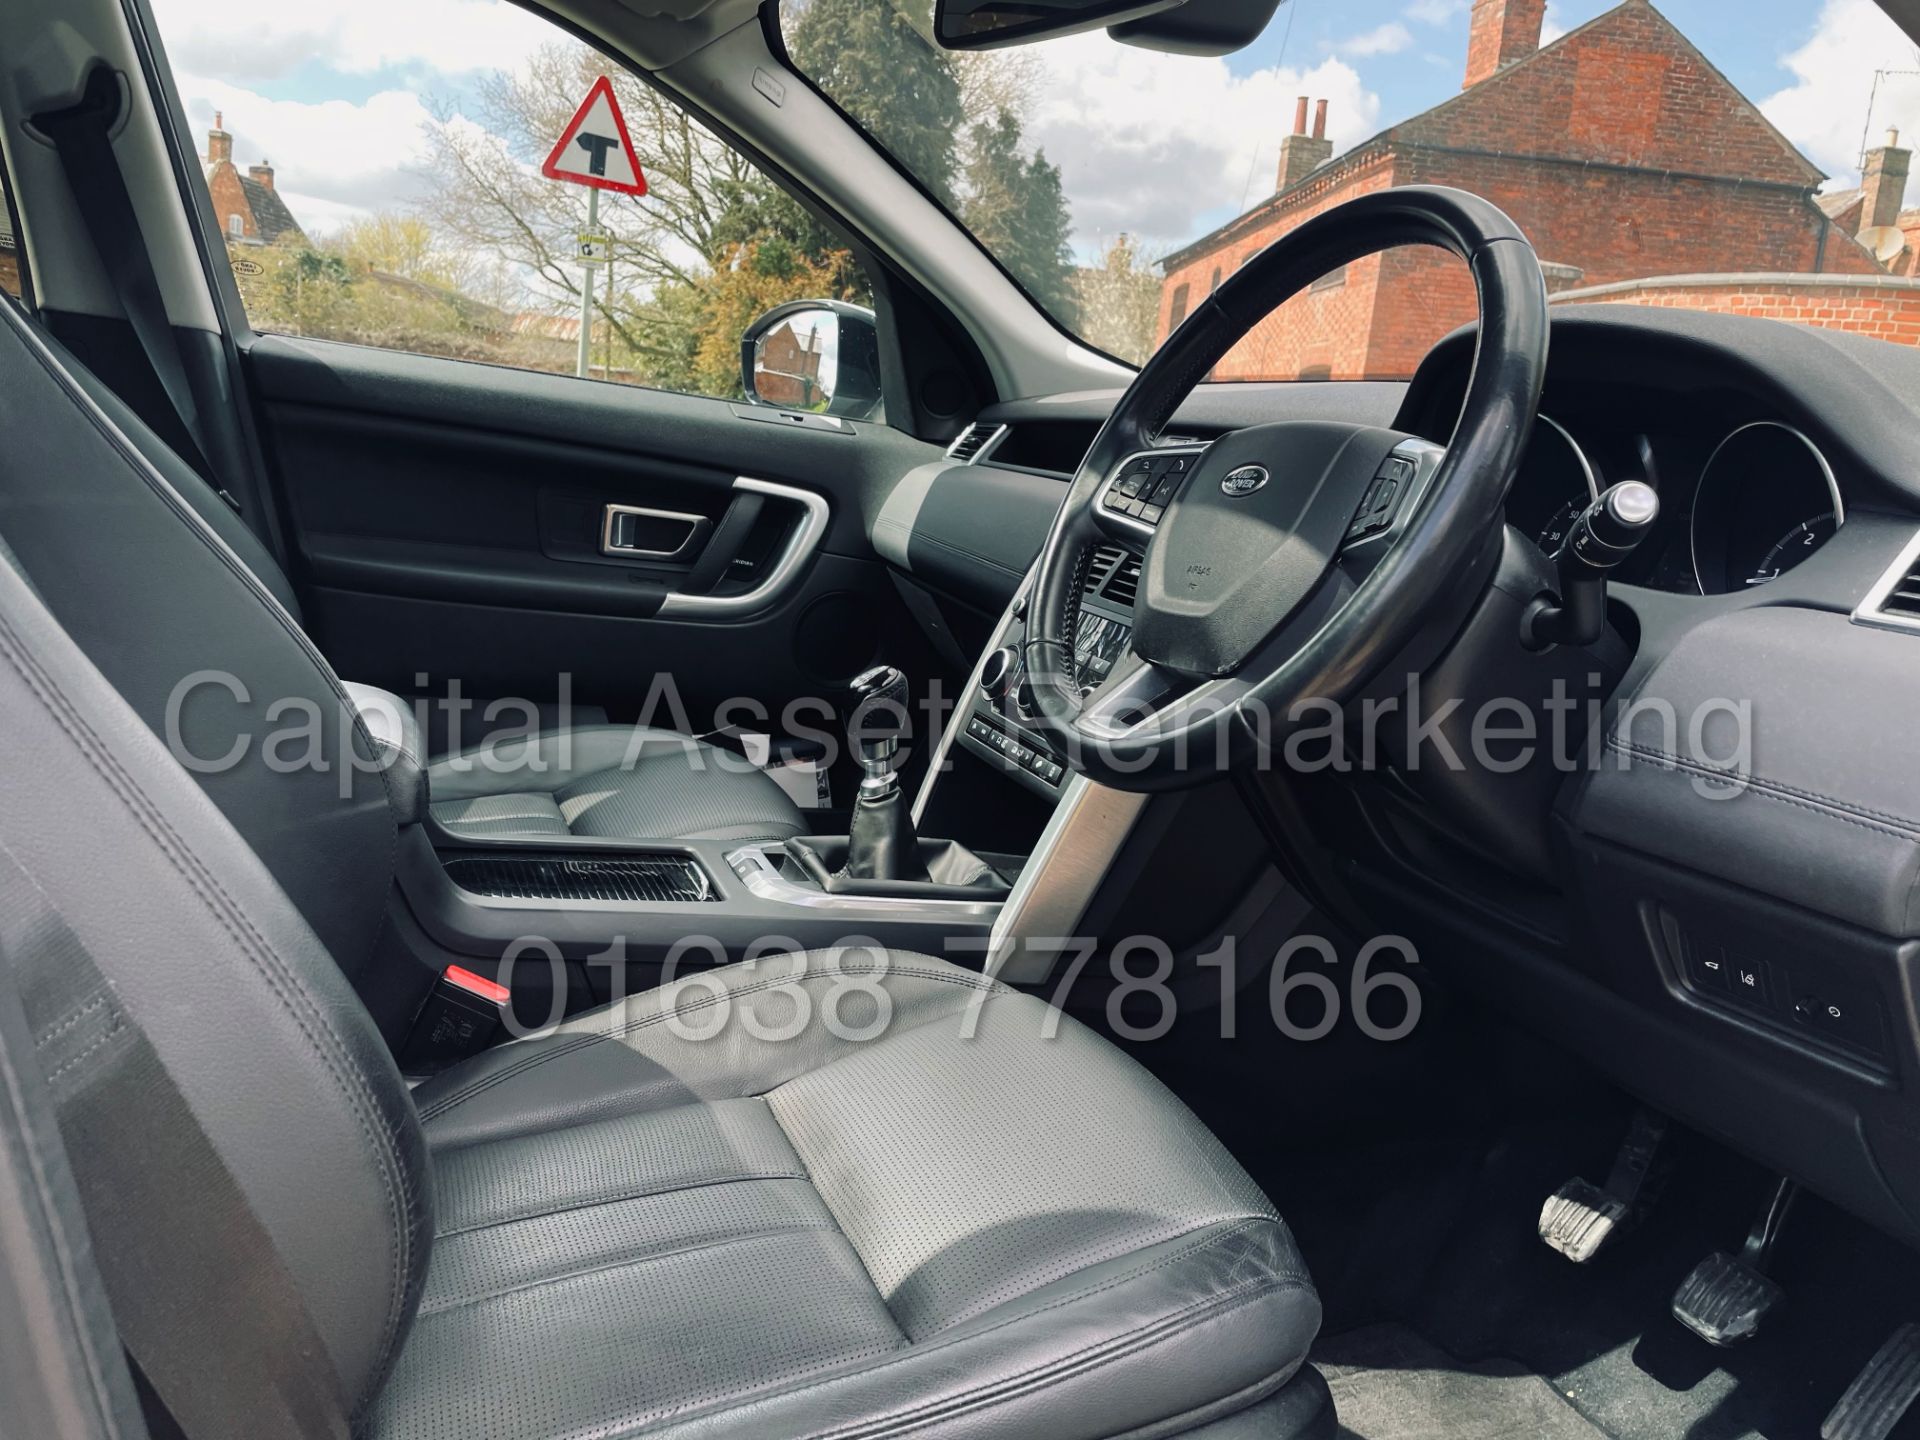 (On Sale) LAND ROVER DISCOVERY SPORT *HSE* SUV (66 REG - 2.0 TD4) *LEATHER - PAN ROOF - SAT NAV* - Image 39 of 55